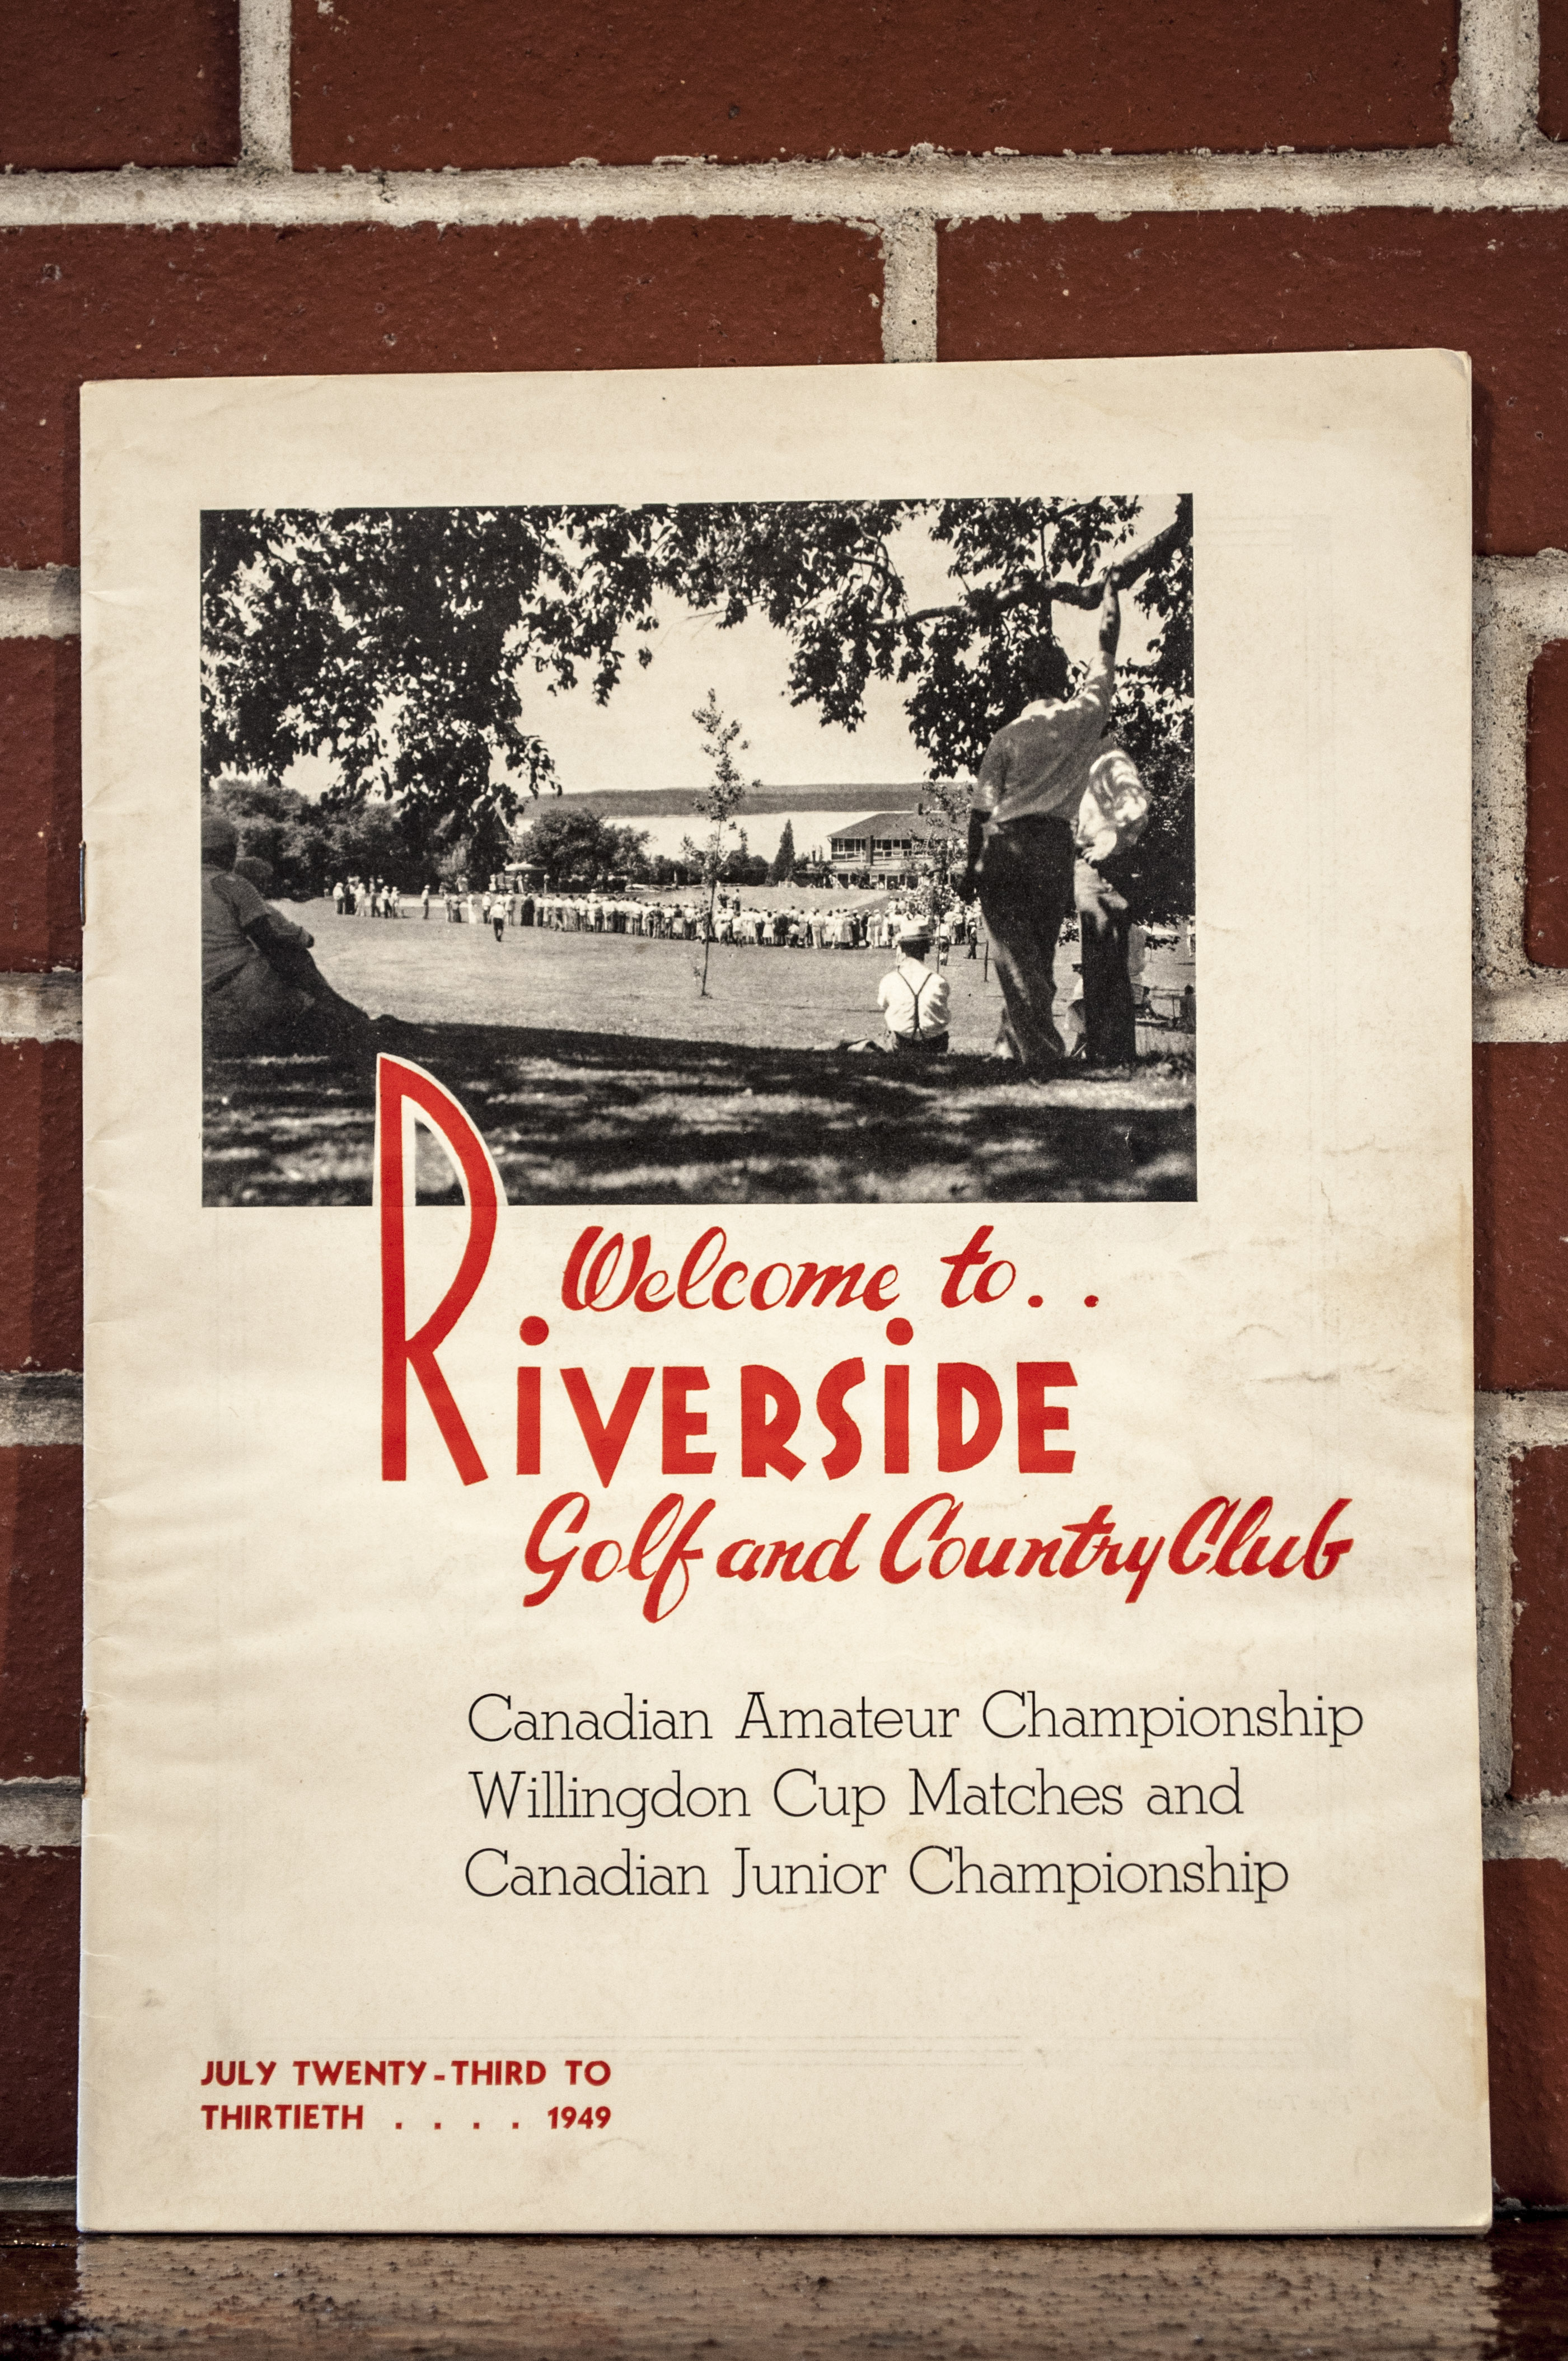 Origins of Riverside, Your Club and Its History